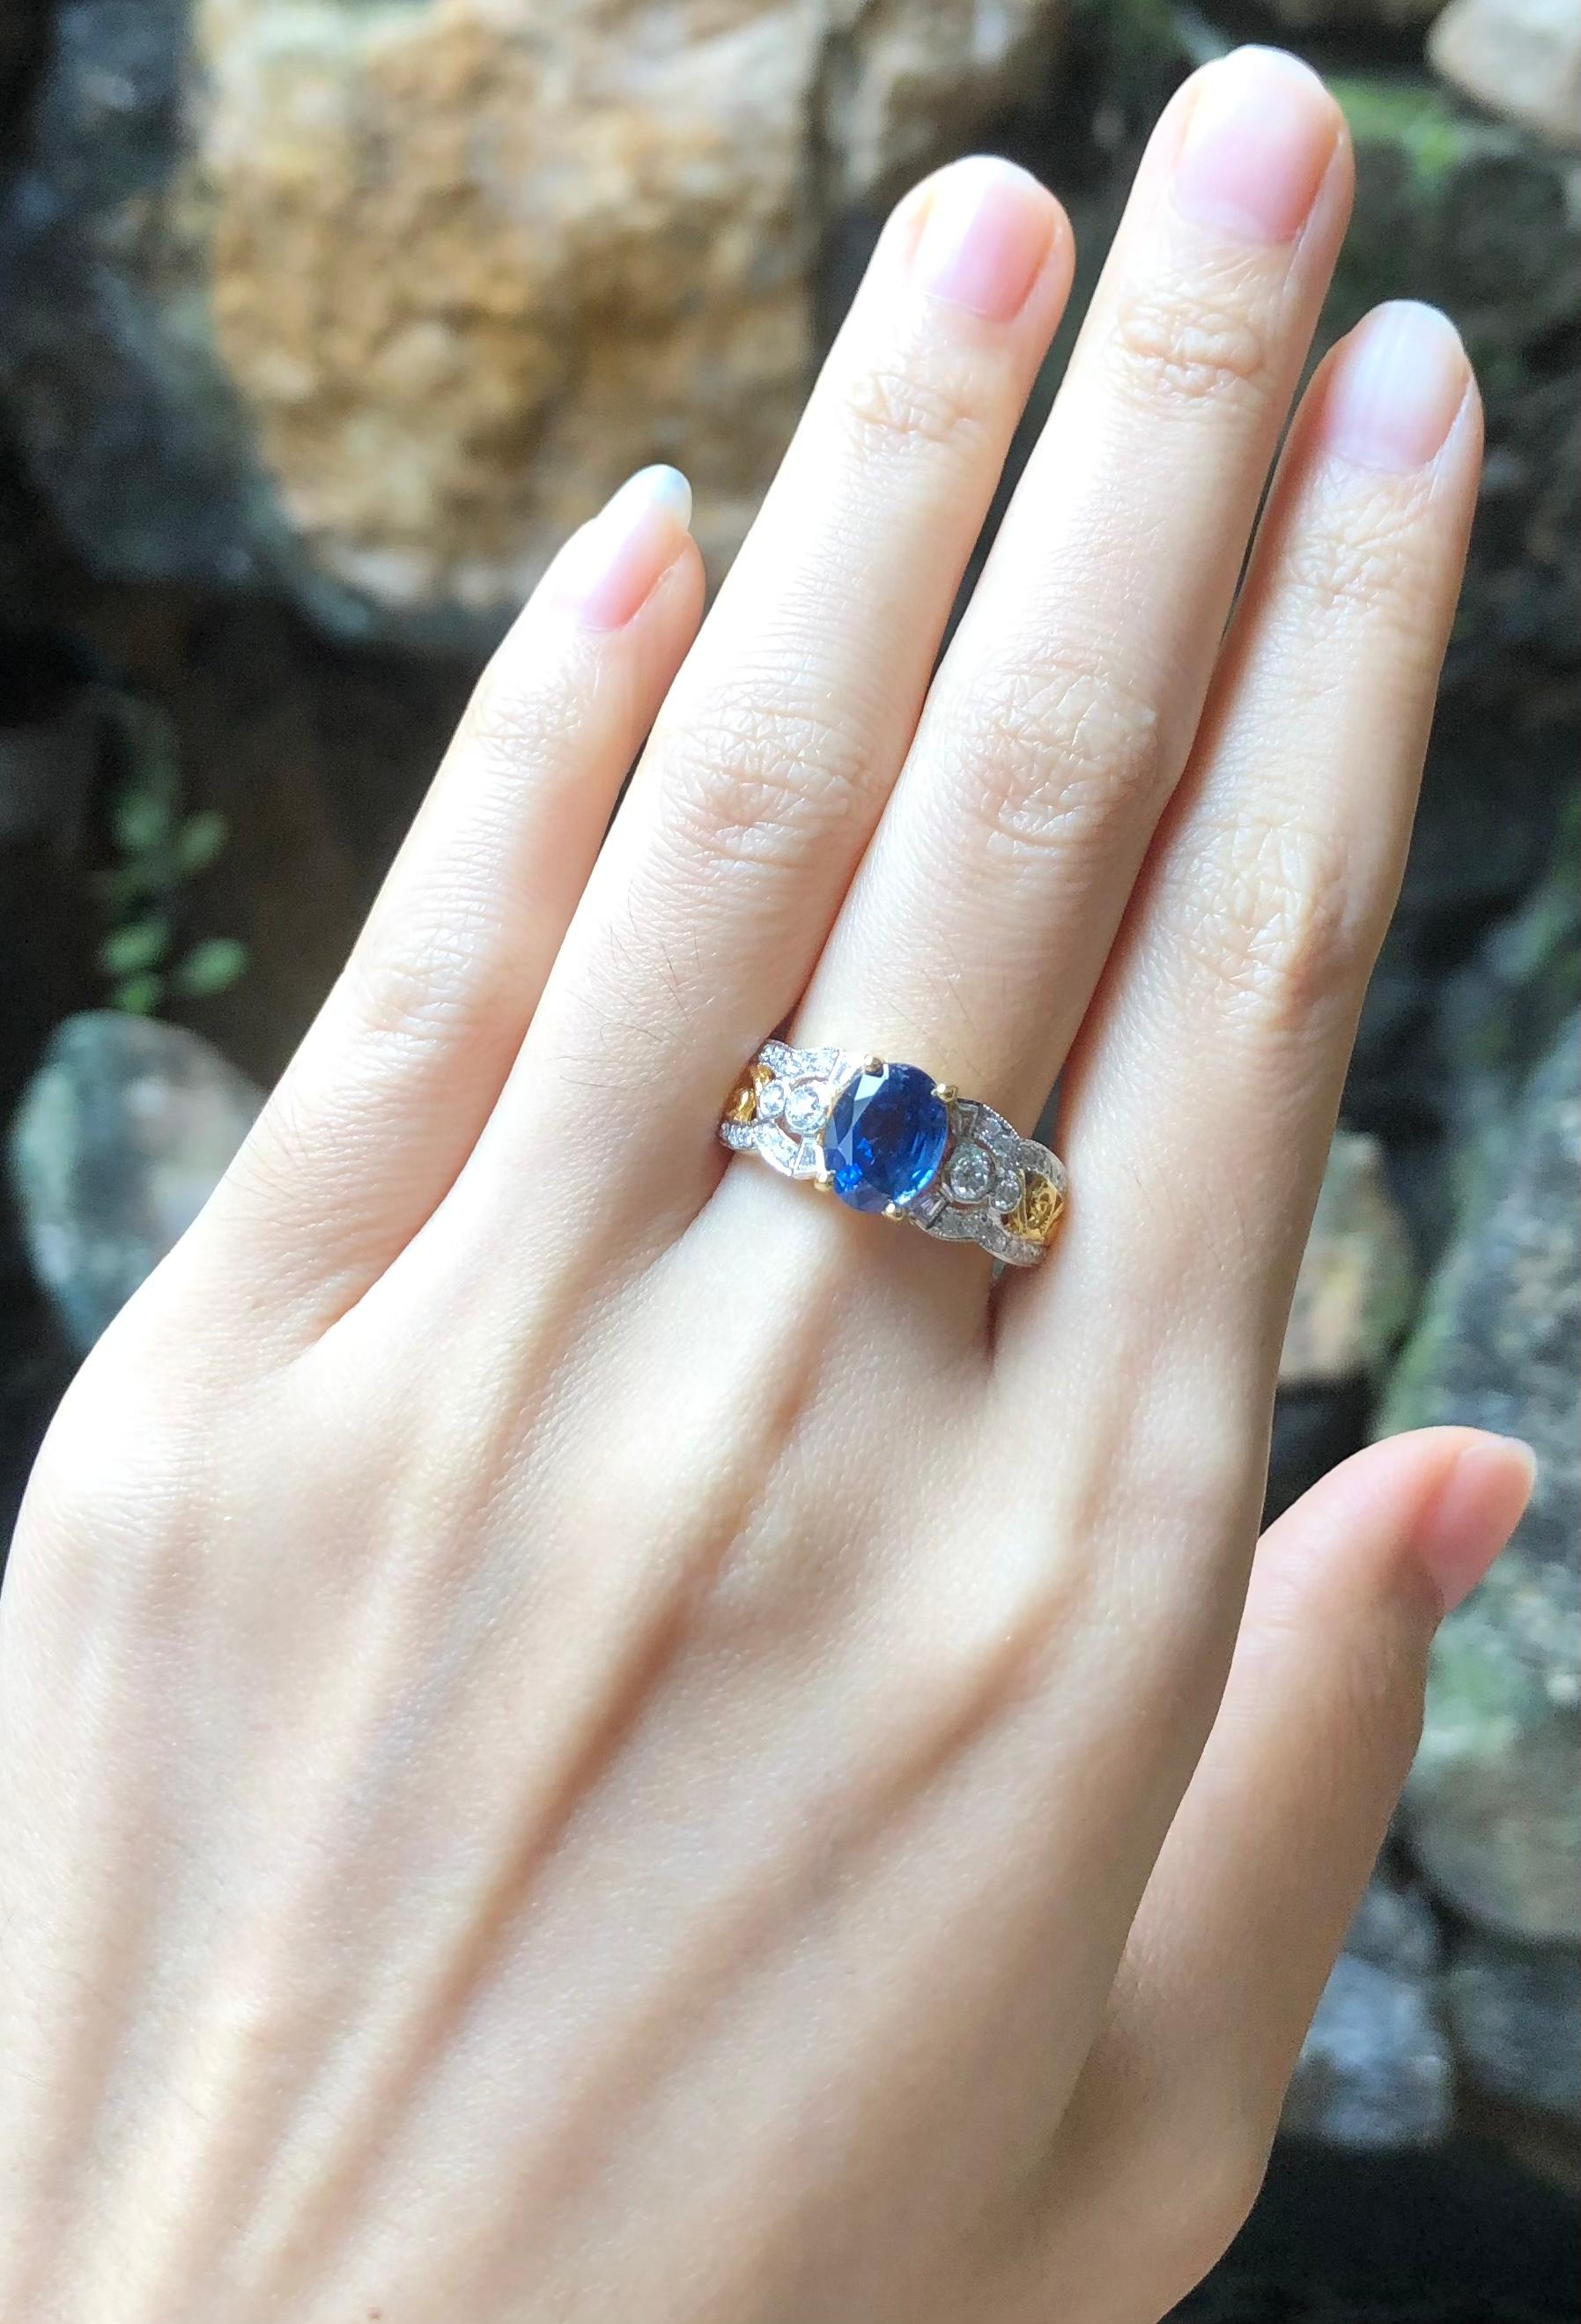 Blue Sapphire 2.23 carats with Diamond 0.68 carat Ring set in 18 Karat Gold Settings

Width:  0.6 cm 
Length: 0.9 cm
Ring Size: 57
Total Weight: 5.54 grams

